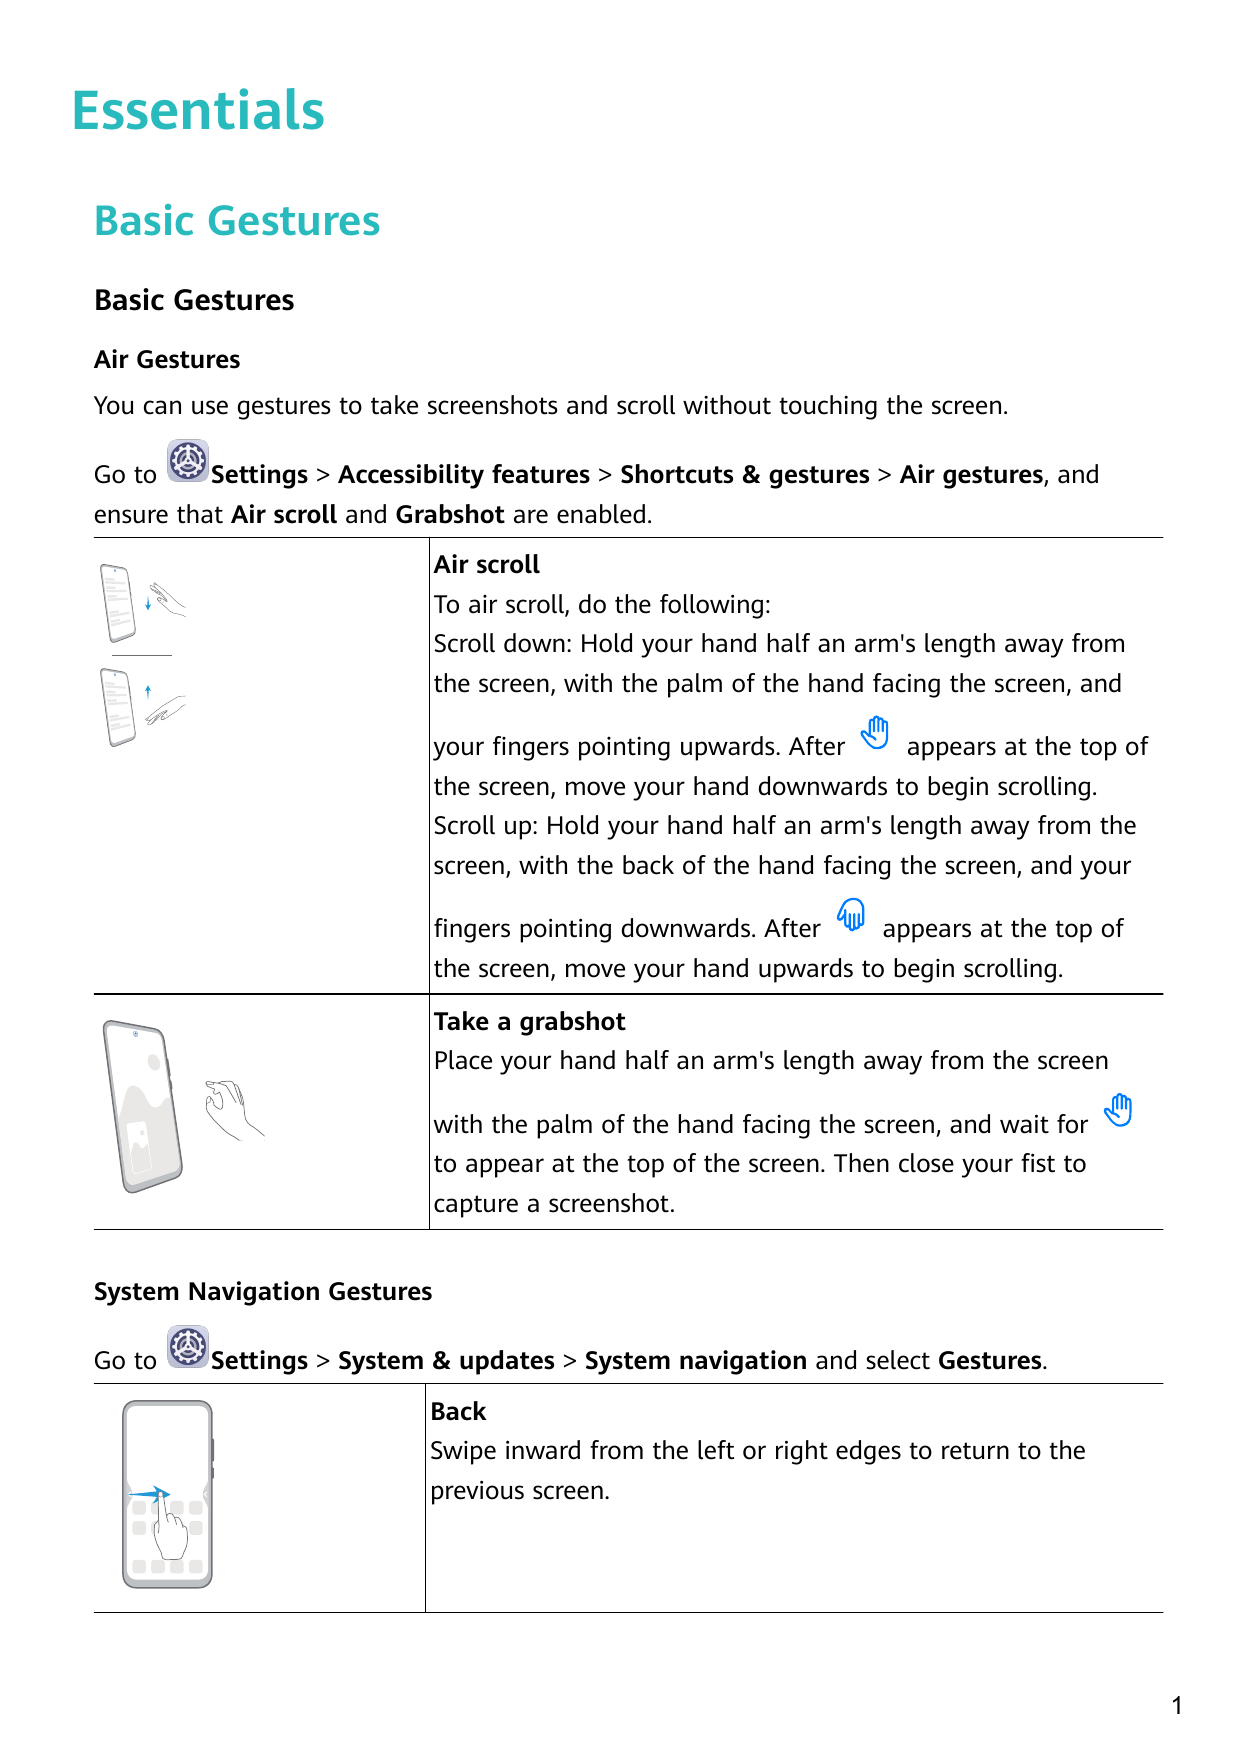 EssentialsBasic GesturesBasic GesturesAir GesturesYou can use gestures to take screenshots and scroll without touching the scree